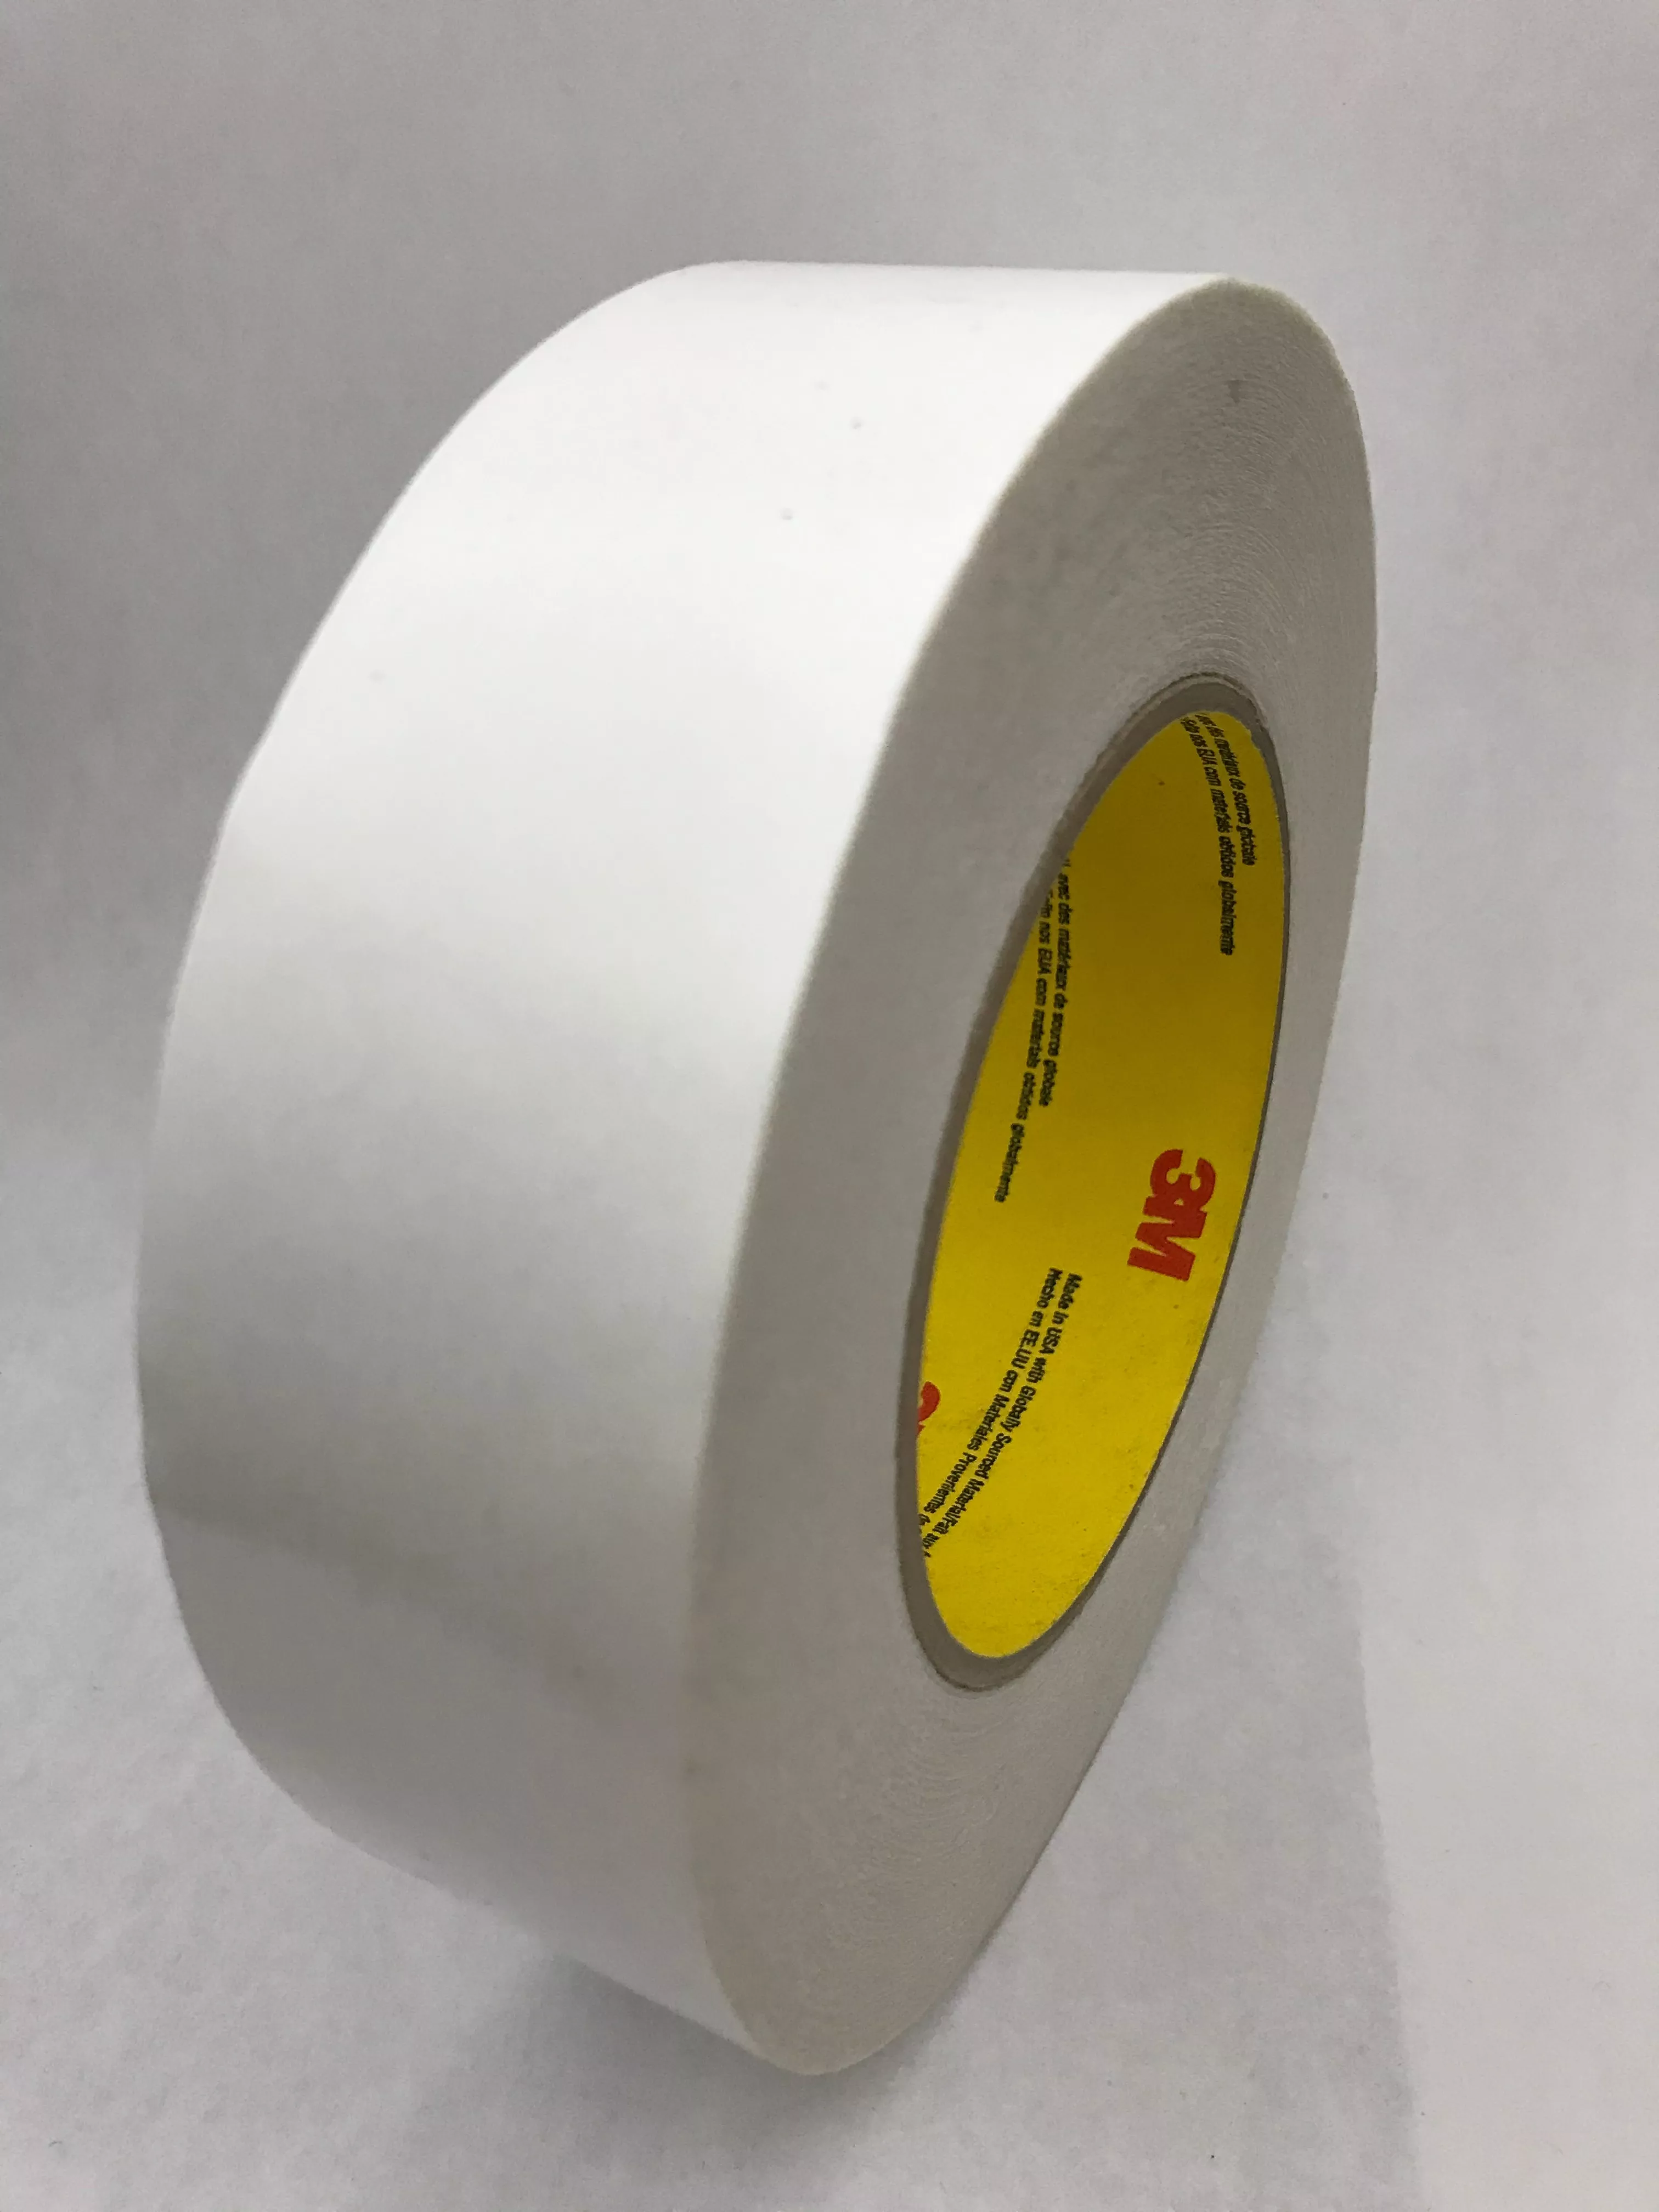 3M™ Venture Tape™ Double Coated Tape 514CW-FD053, 37.12 mm X 54.8 m,
0.01 mm, 32 Roll/Case